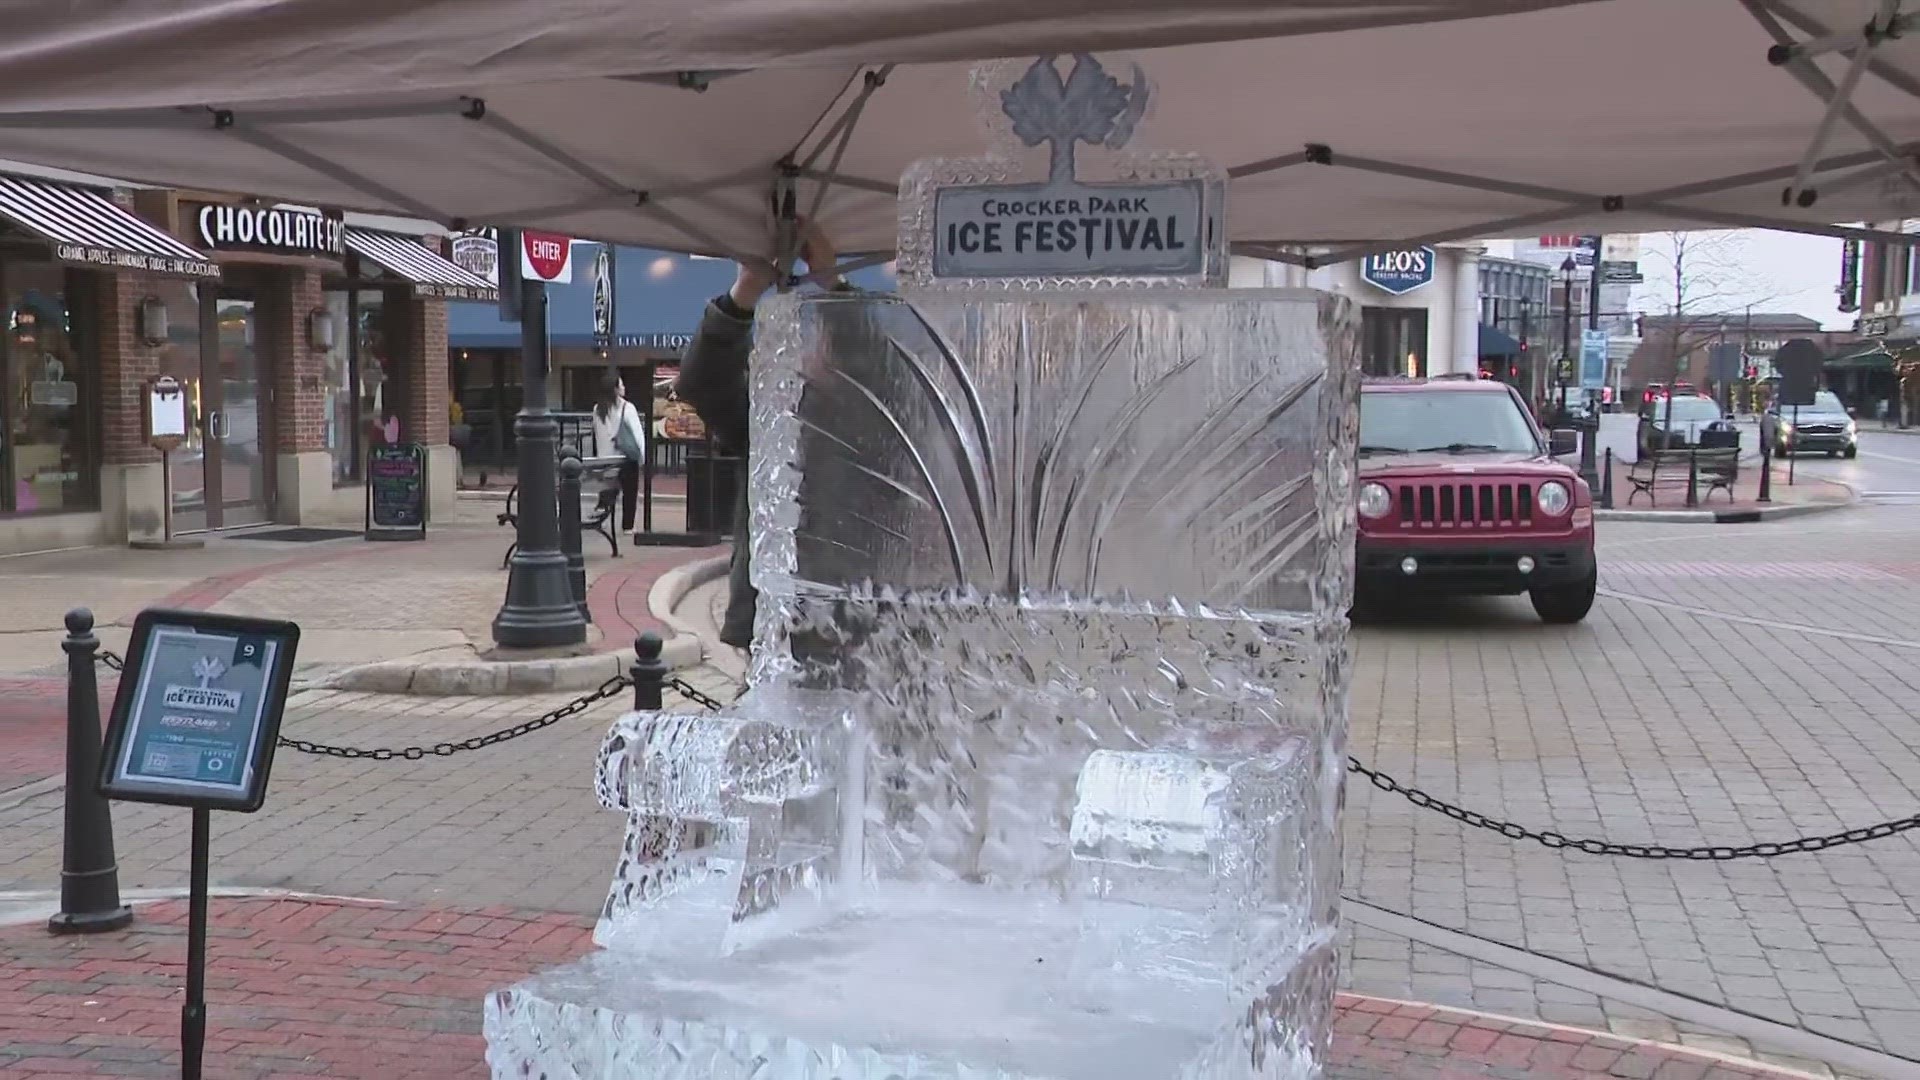 Crocker Park and The Farmpark are hosting ice festivals this weekend.